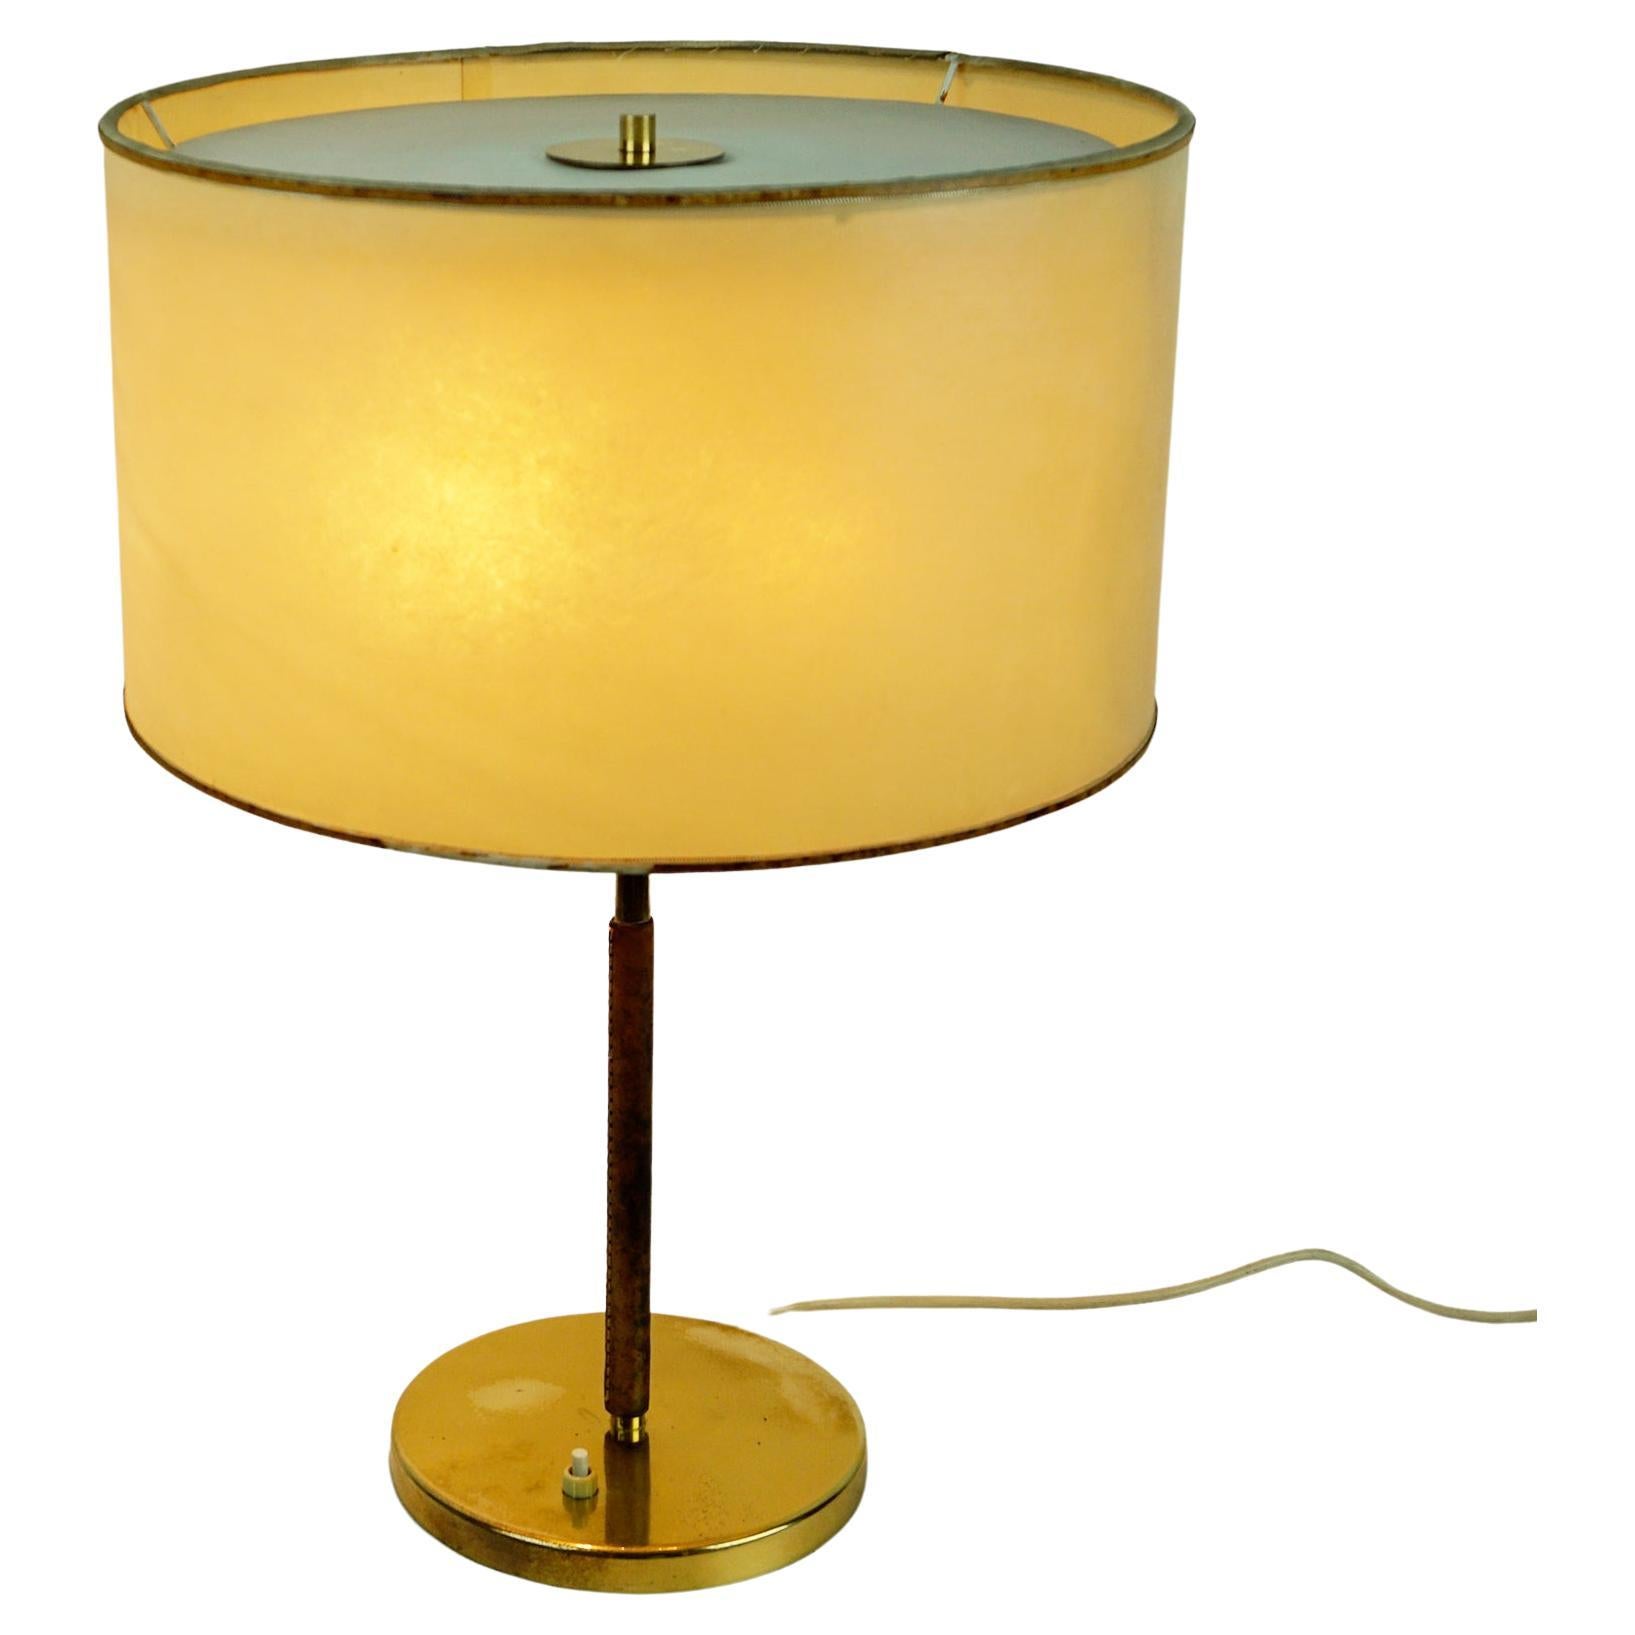 Austrian Midcentury Brass and Leather Table Lamp Mod. 1268 Essen by J. T. Kalmar For Sale